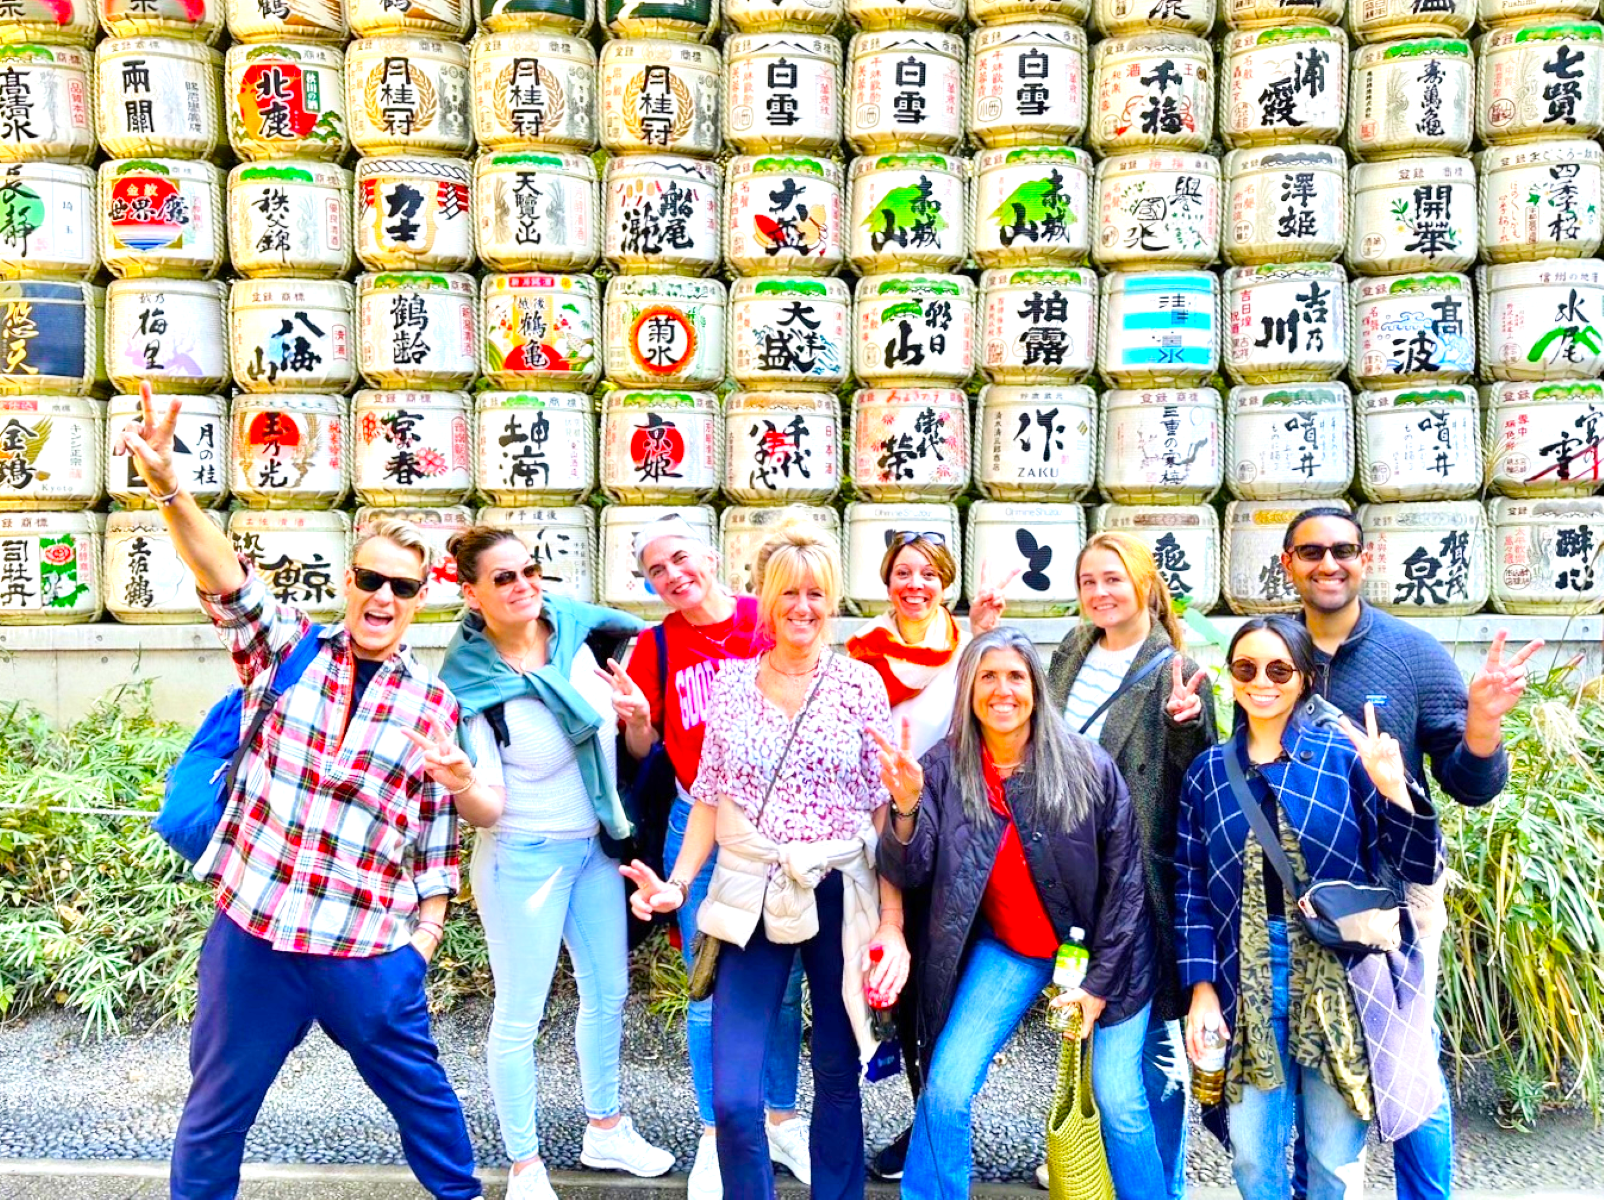 Complete Tokyo Tour in One Day, Visit All 15 Popular Sights!